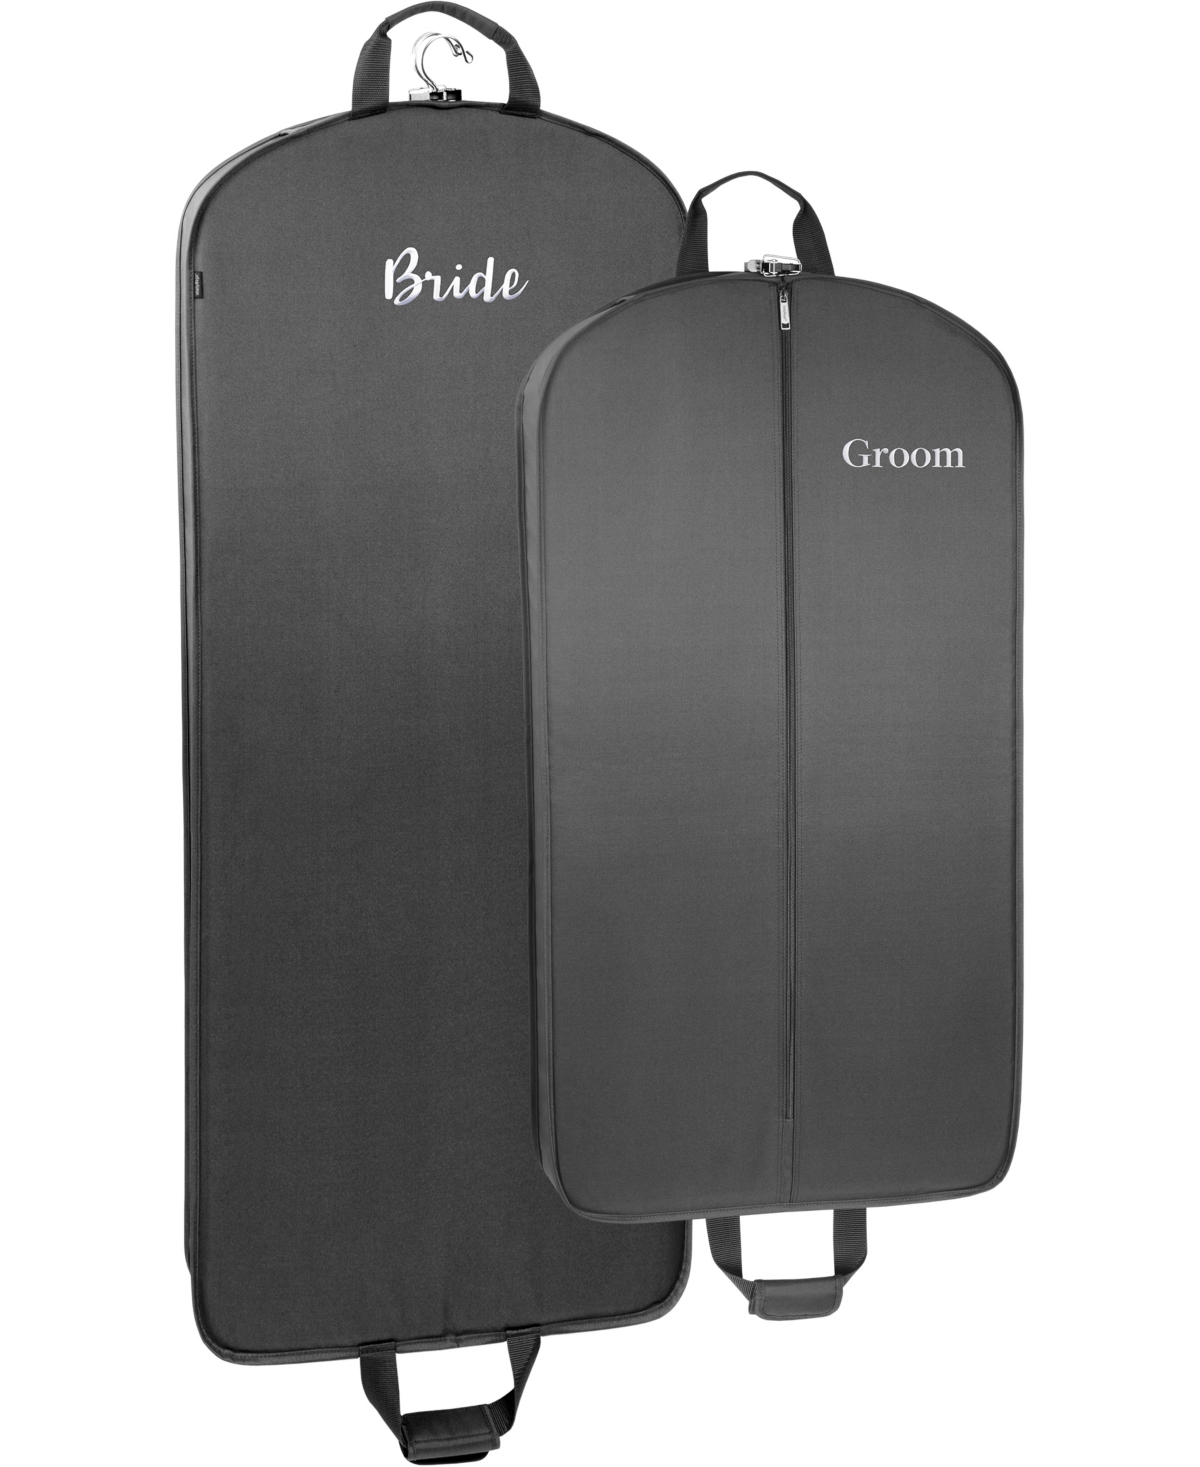 Wallybags 60" Deluxe Travel Garment Bag With Bride Embroidery And 40" Deluxe Travel Garment Bag With Groom Emb In Black - Bg